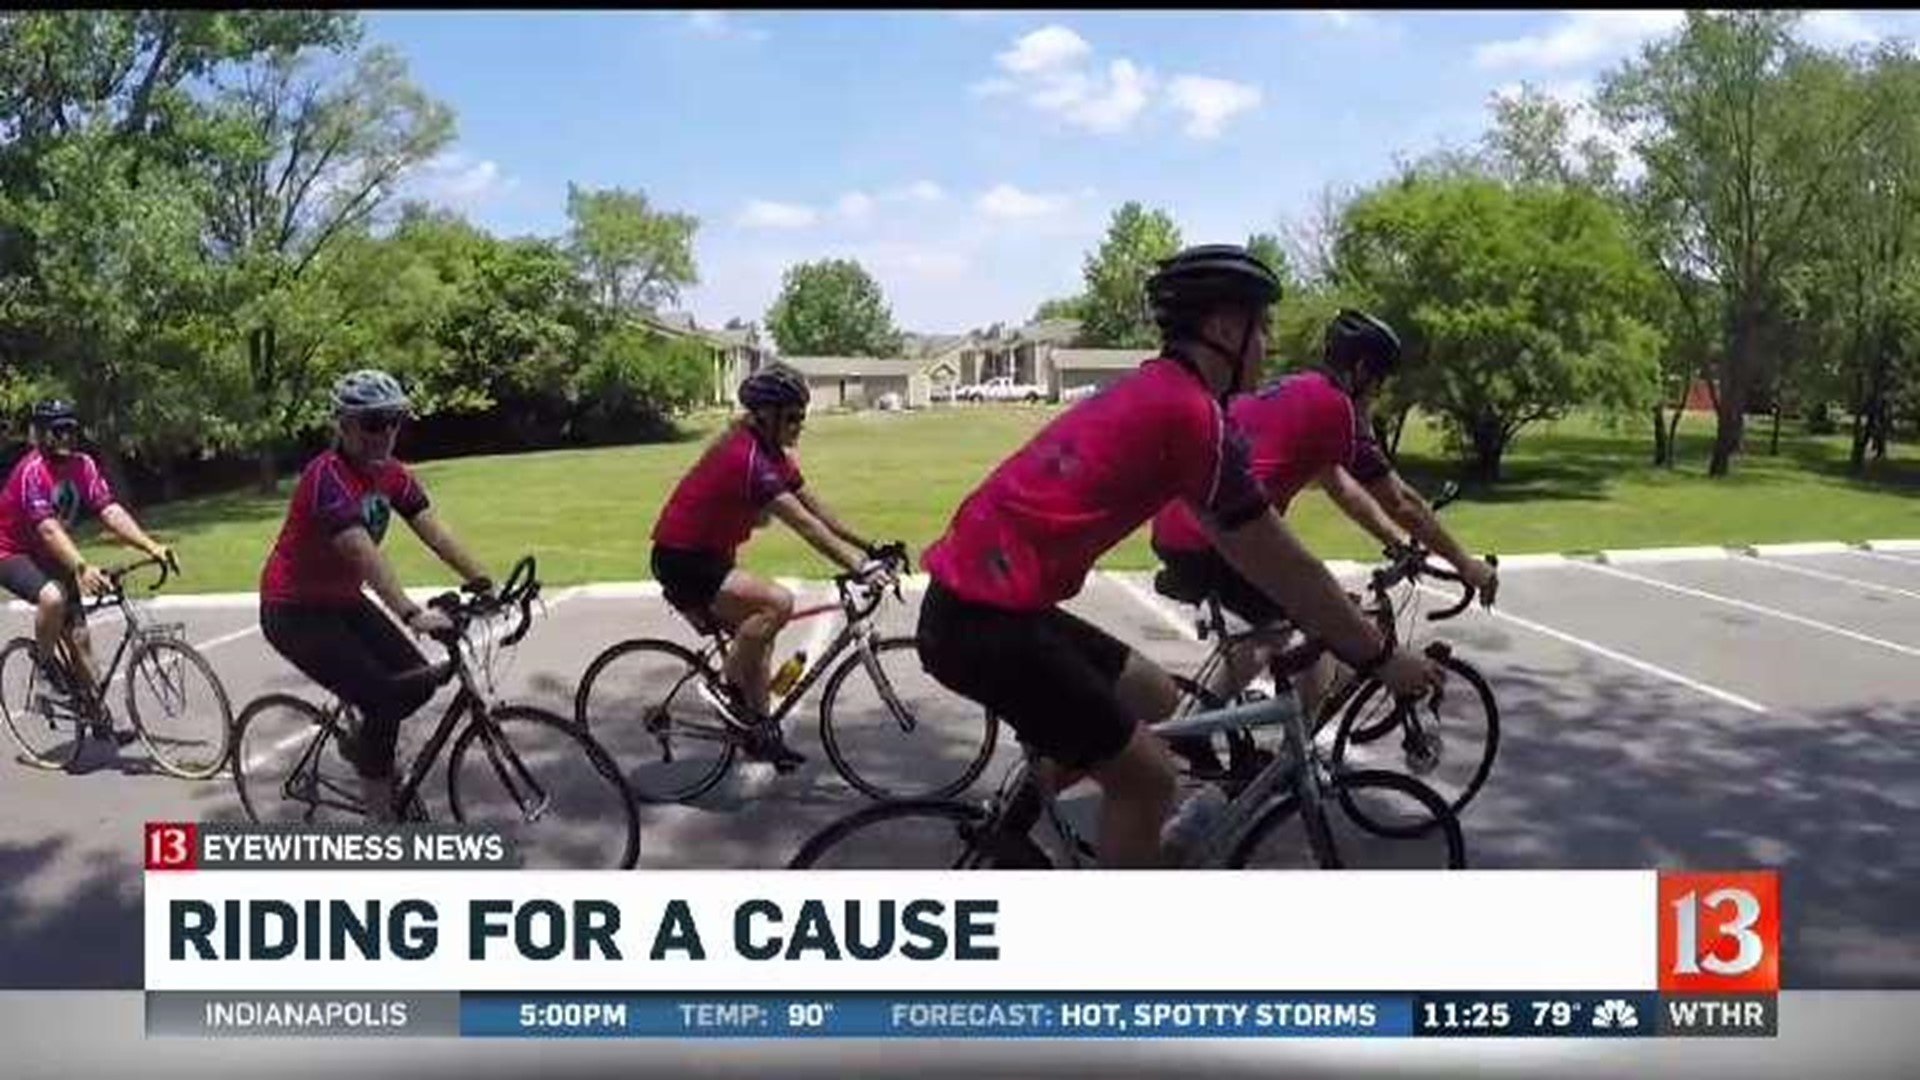 Riding for a Good Cause